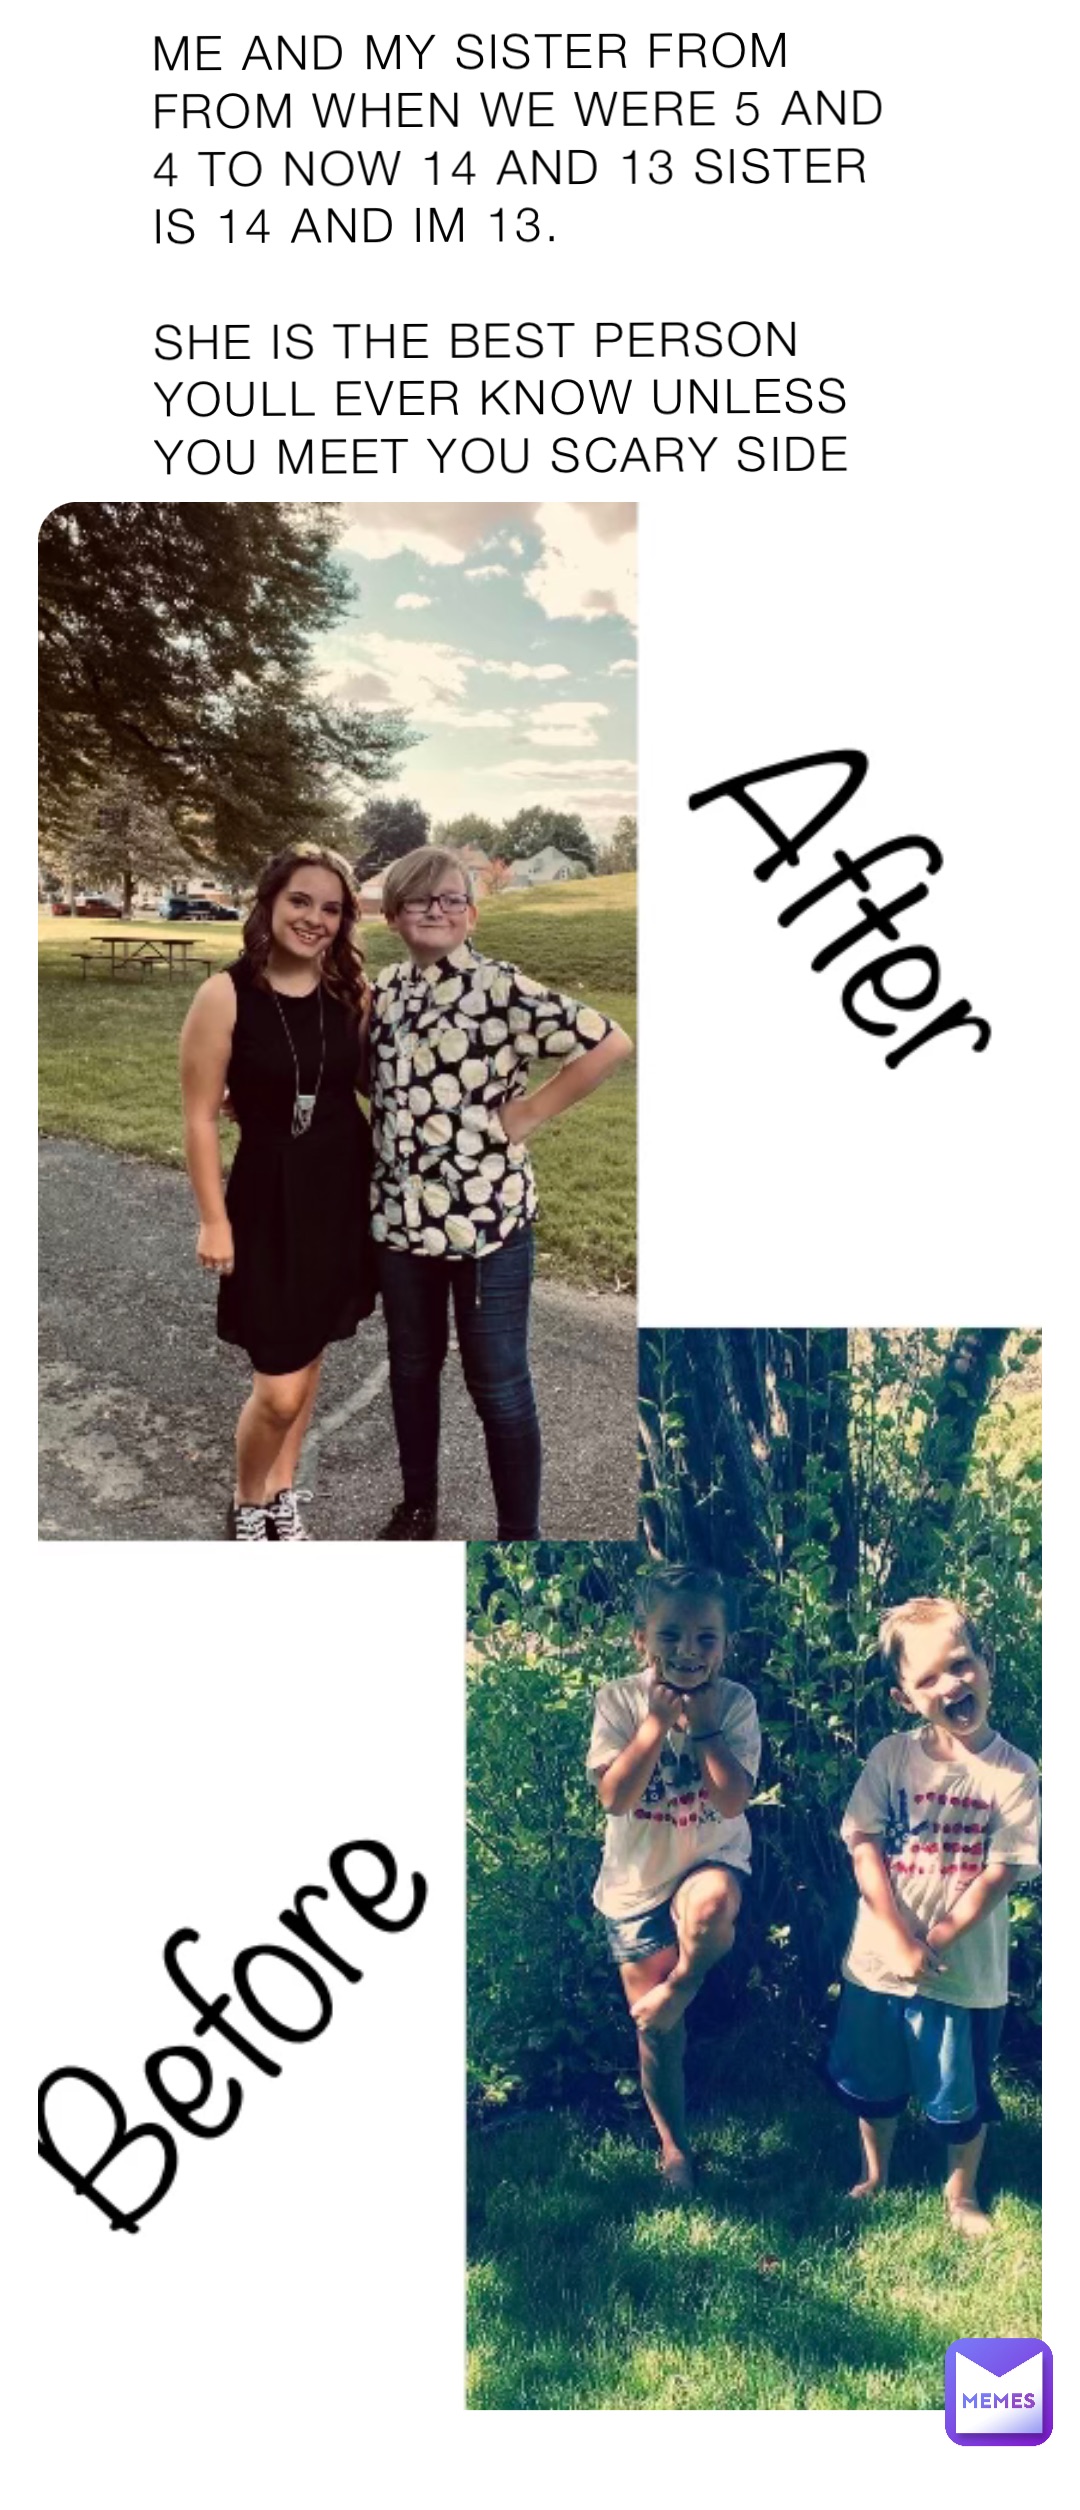 ME AND MY SISTER FROM FROM WHEN WE WERE 5 AND 4 TO NOW 14 AND 13 SISTER IS 14 AND IM 13.

SHE IS THE BEST PERSON YOULL EVER KNOW UNLESS YOU MEET YOU SCARY SIDE